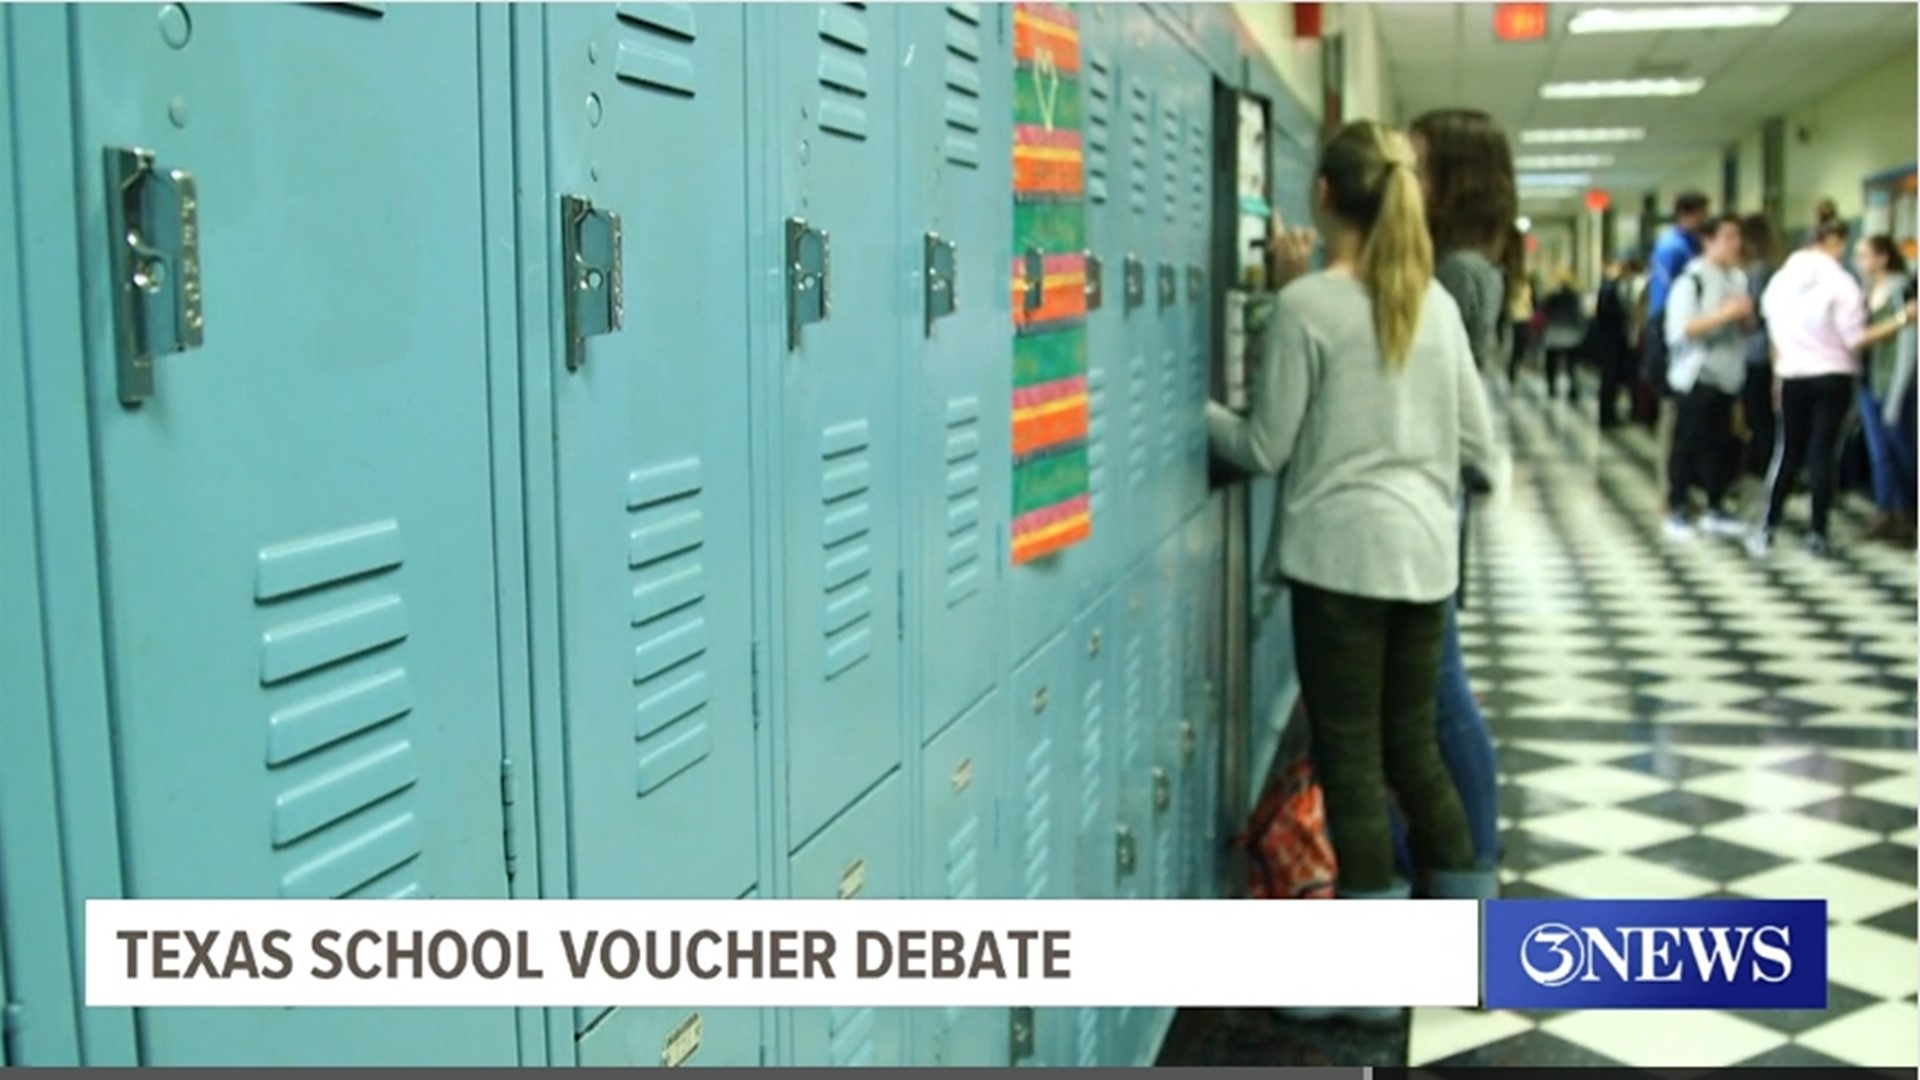 If SB 1 is approved by the House, $500M would be used over the next two years to fund the voucher program.